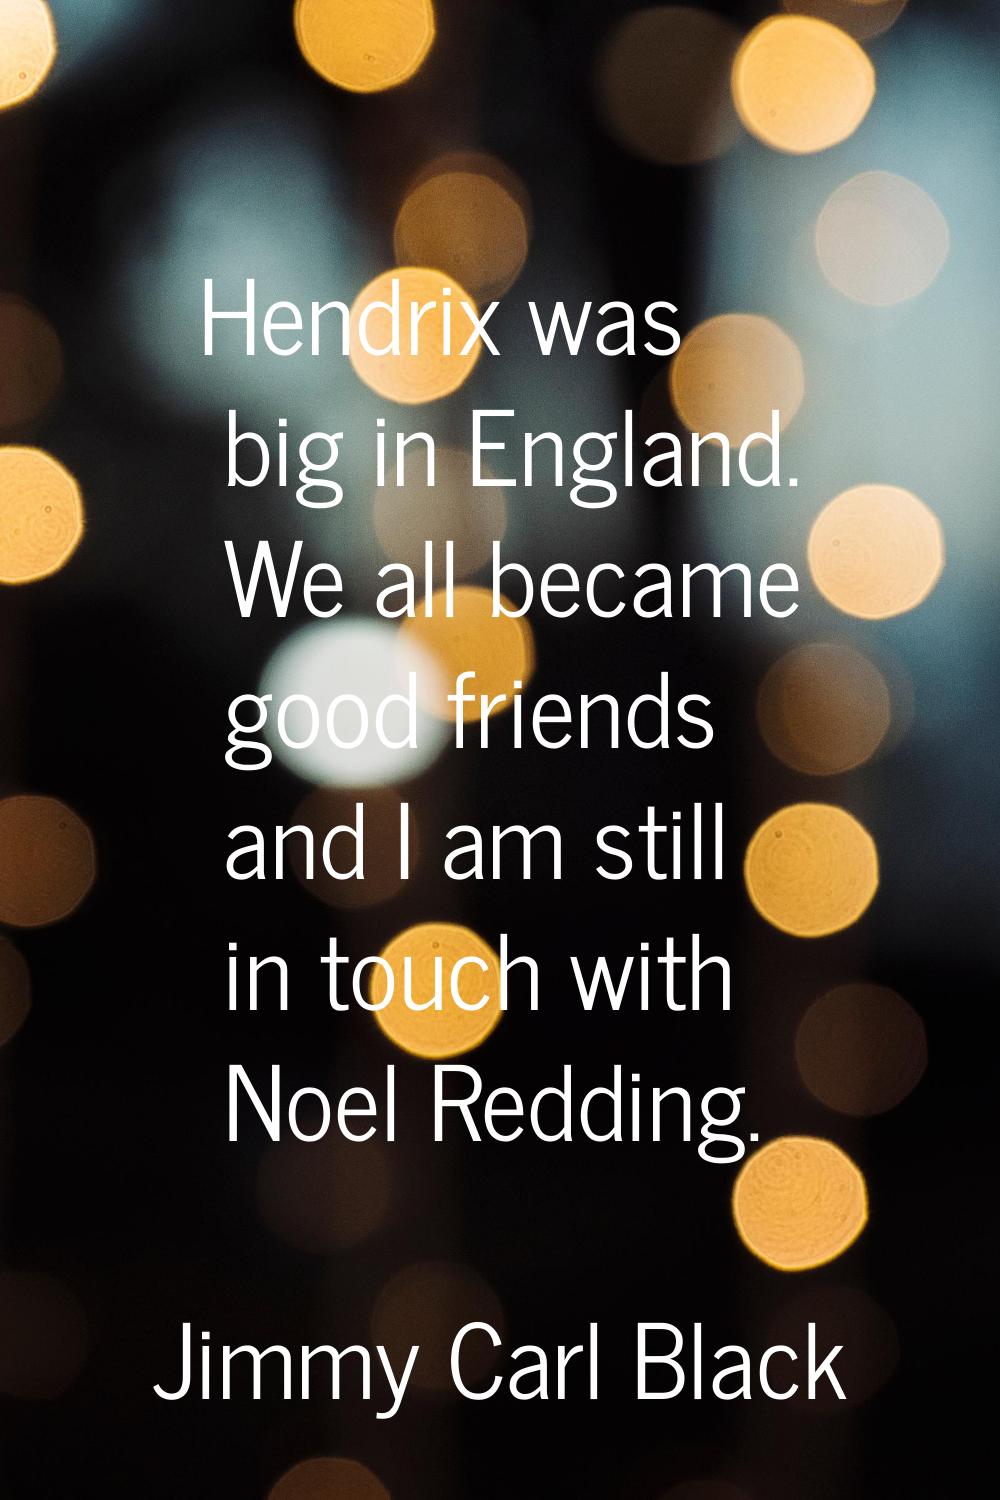 Hendrix was big in England. We all became good friends and I am still in touch with Noel Redding.